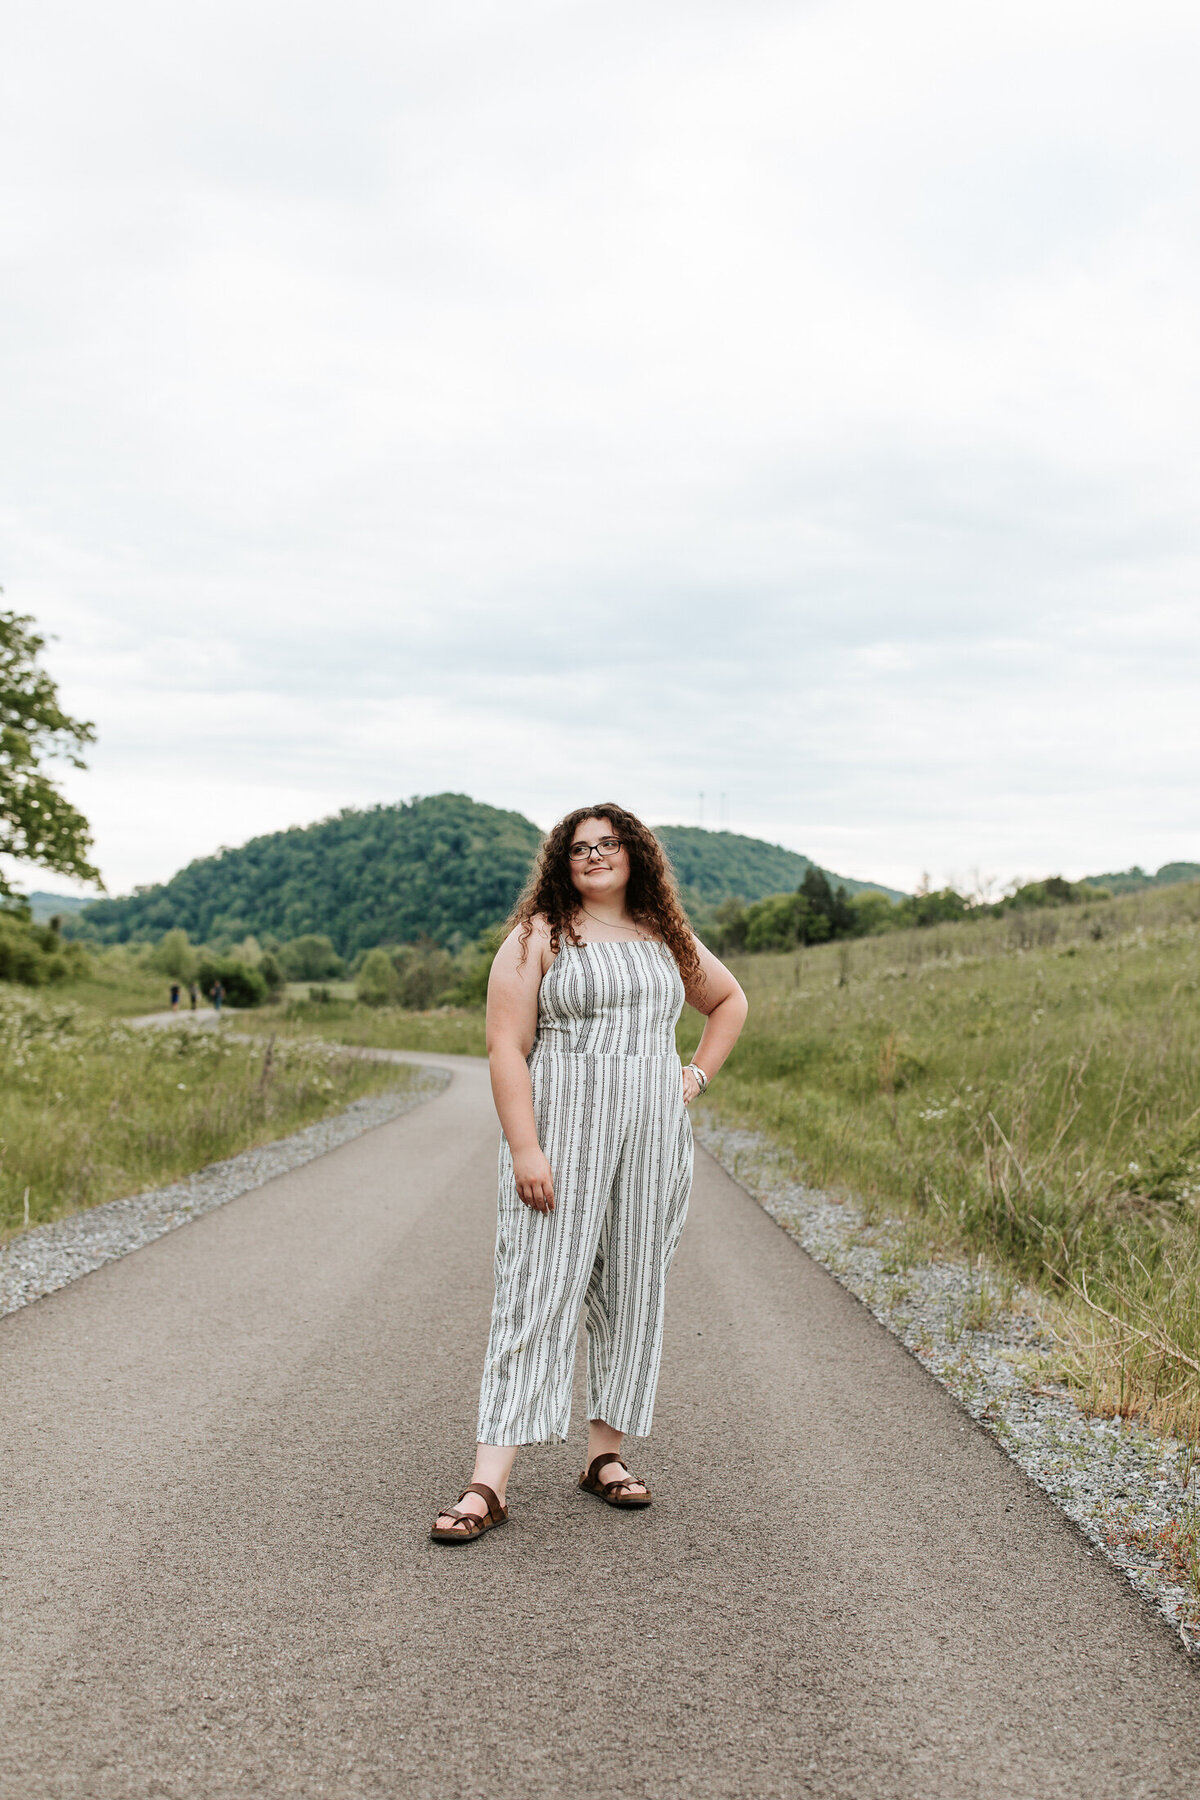 Knoxville TN Senior Session | Carly Crawford Photography | Knoxville Wedding, Couple, and Portrait Photographer-4